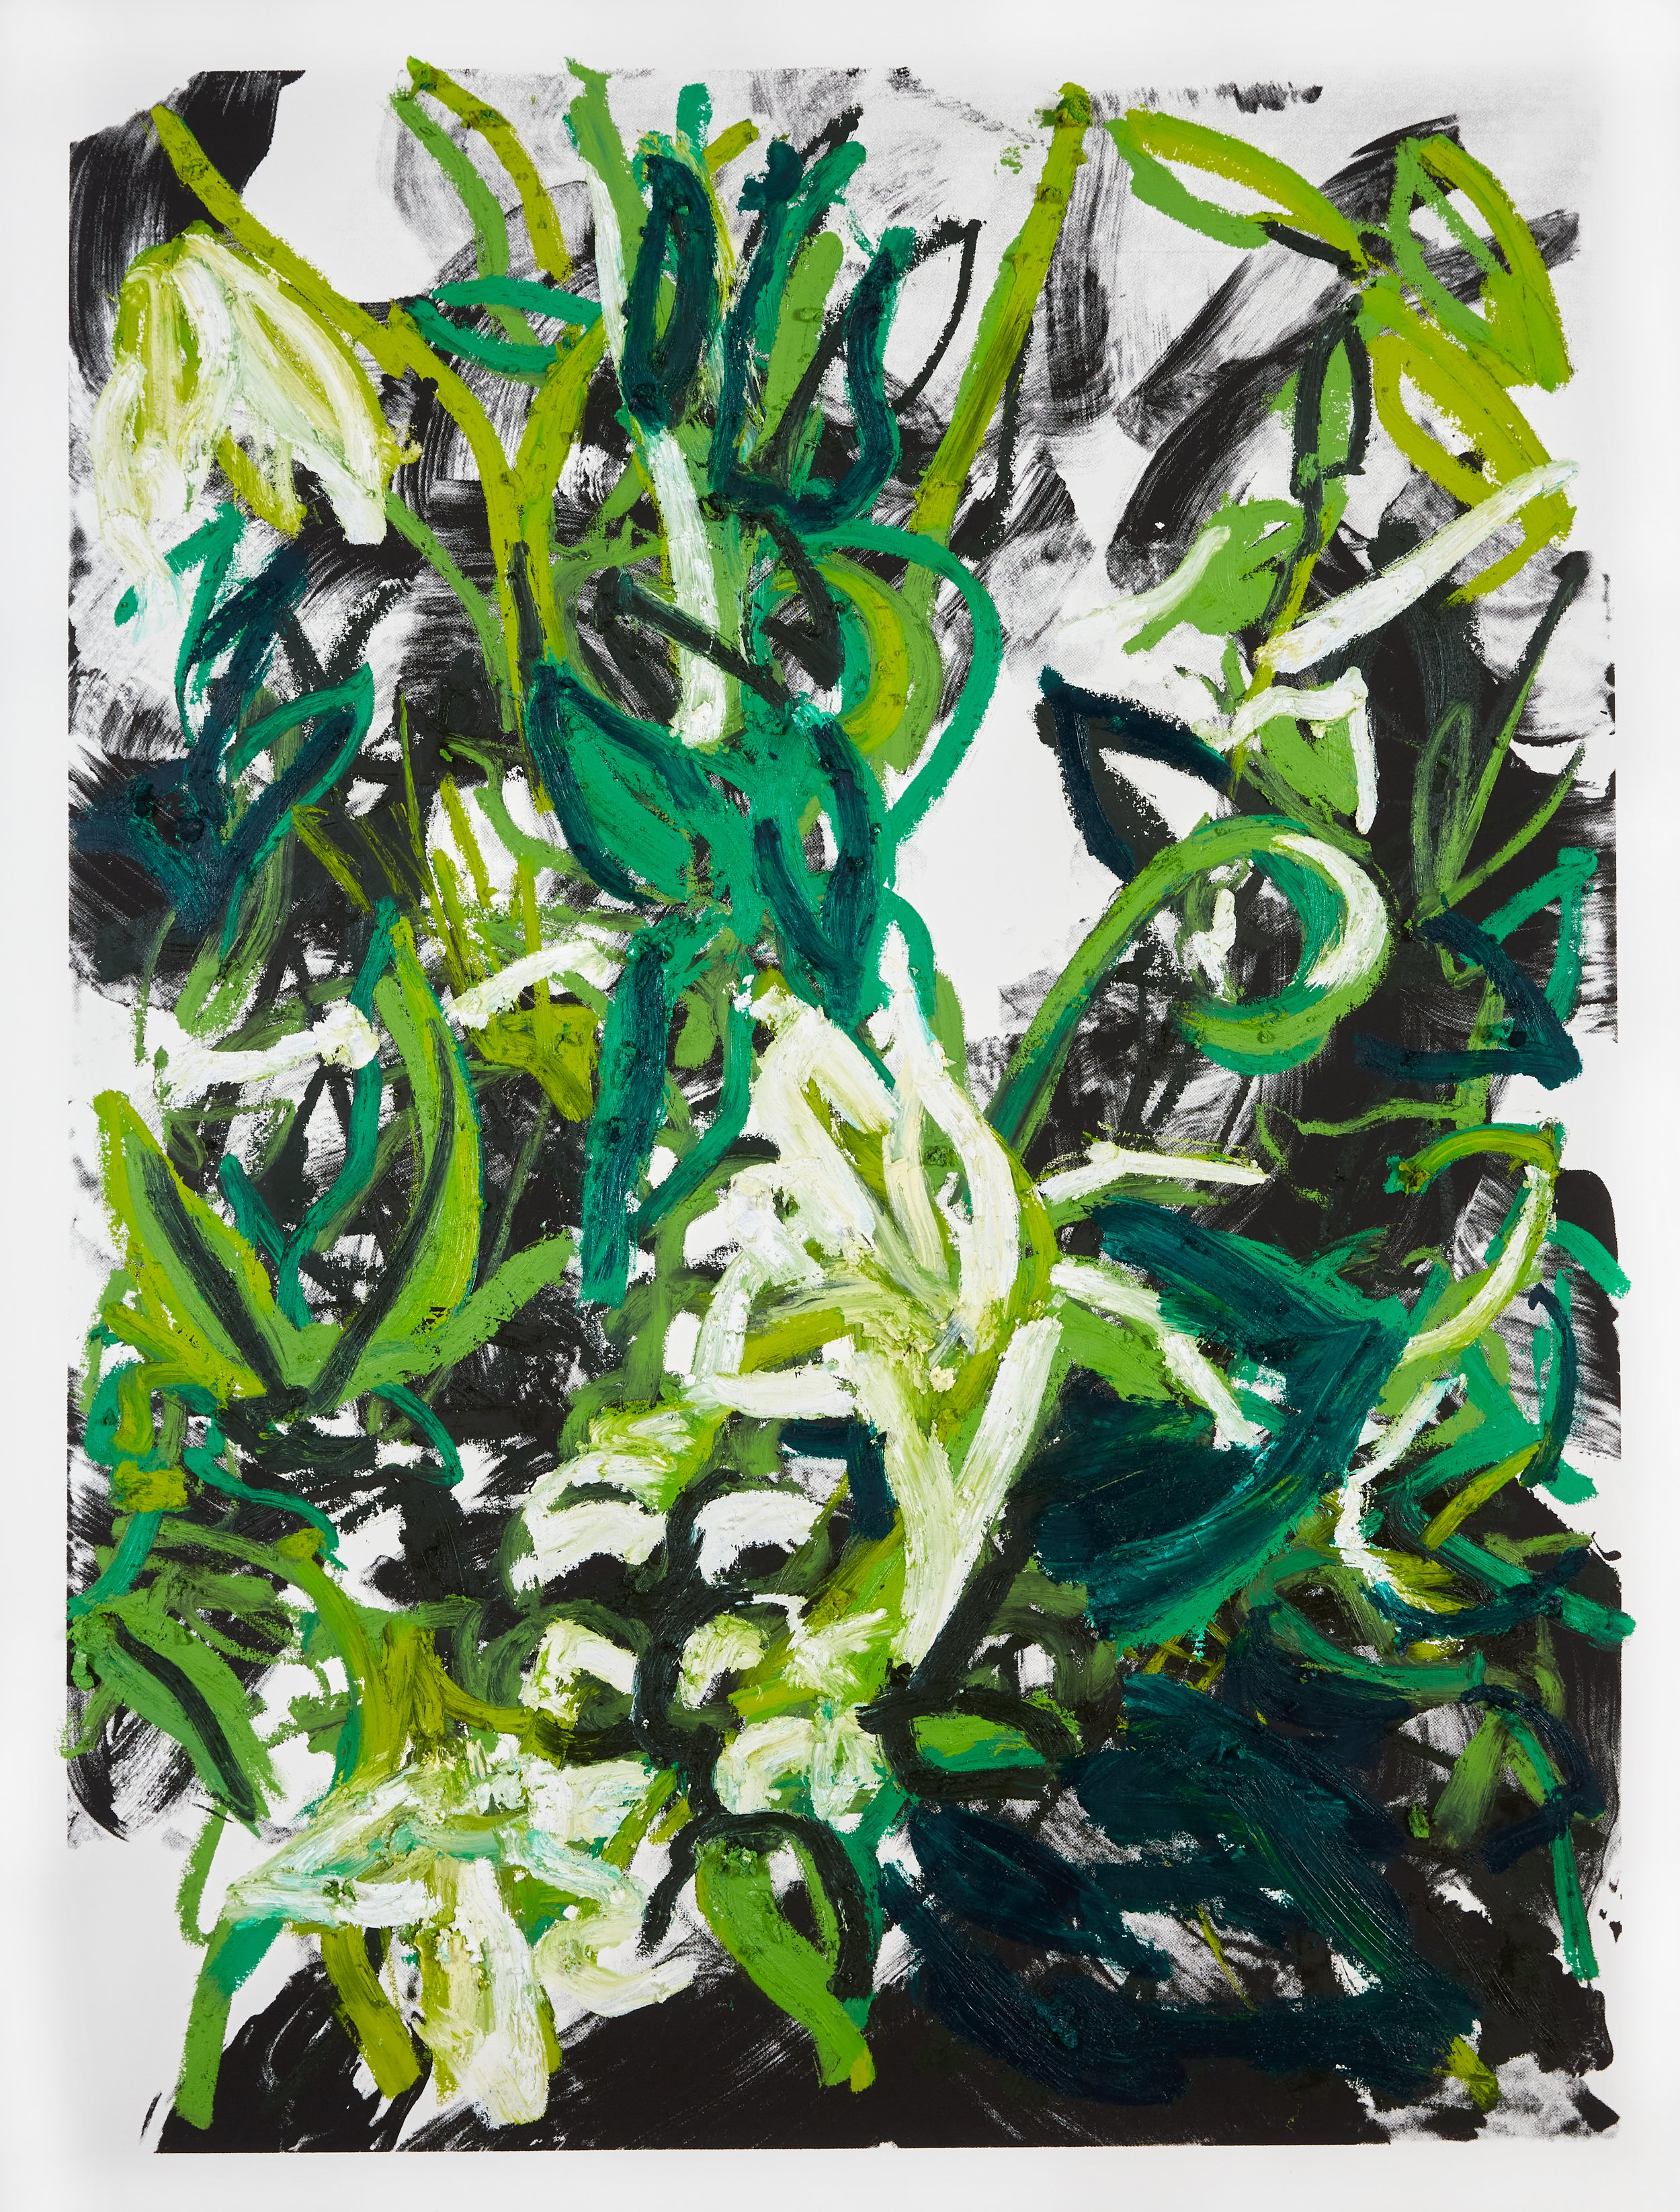 BECOMING SOMEONE ELSE: GREEN (MONOPRINT), 2023, Oil stick, paper monoprint (black), 40 x 30 inches, labeled “M.P.,” signed, and dated, unframed